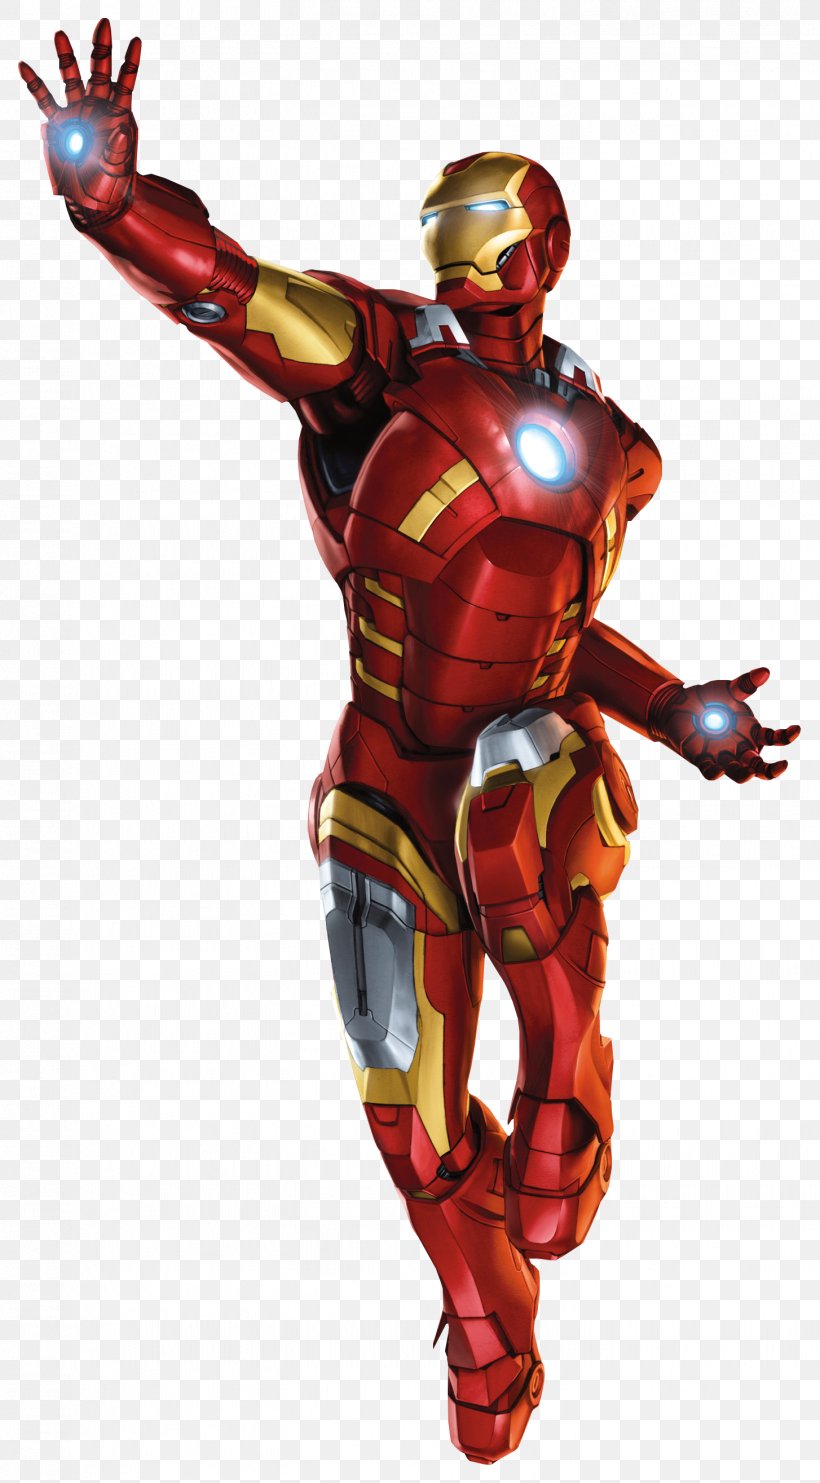 Iron Man's Armor Edwin Jarvis Desktop Wallpaper, PNG, 1454x2630px, Iron Man, Action Figure, Edwin Jarvis, Fictional Character, Figurine Download Free